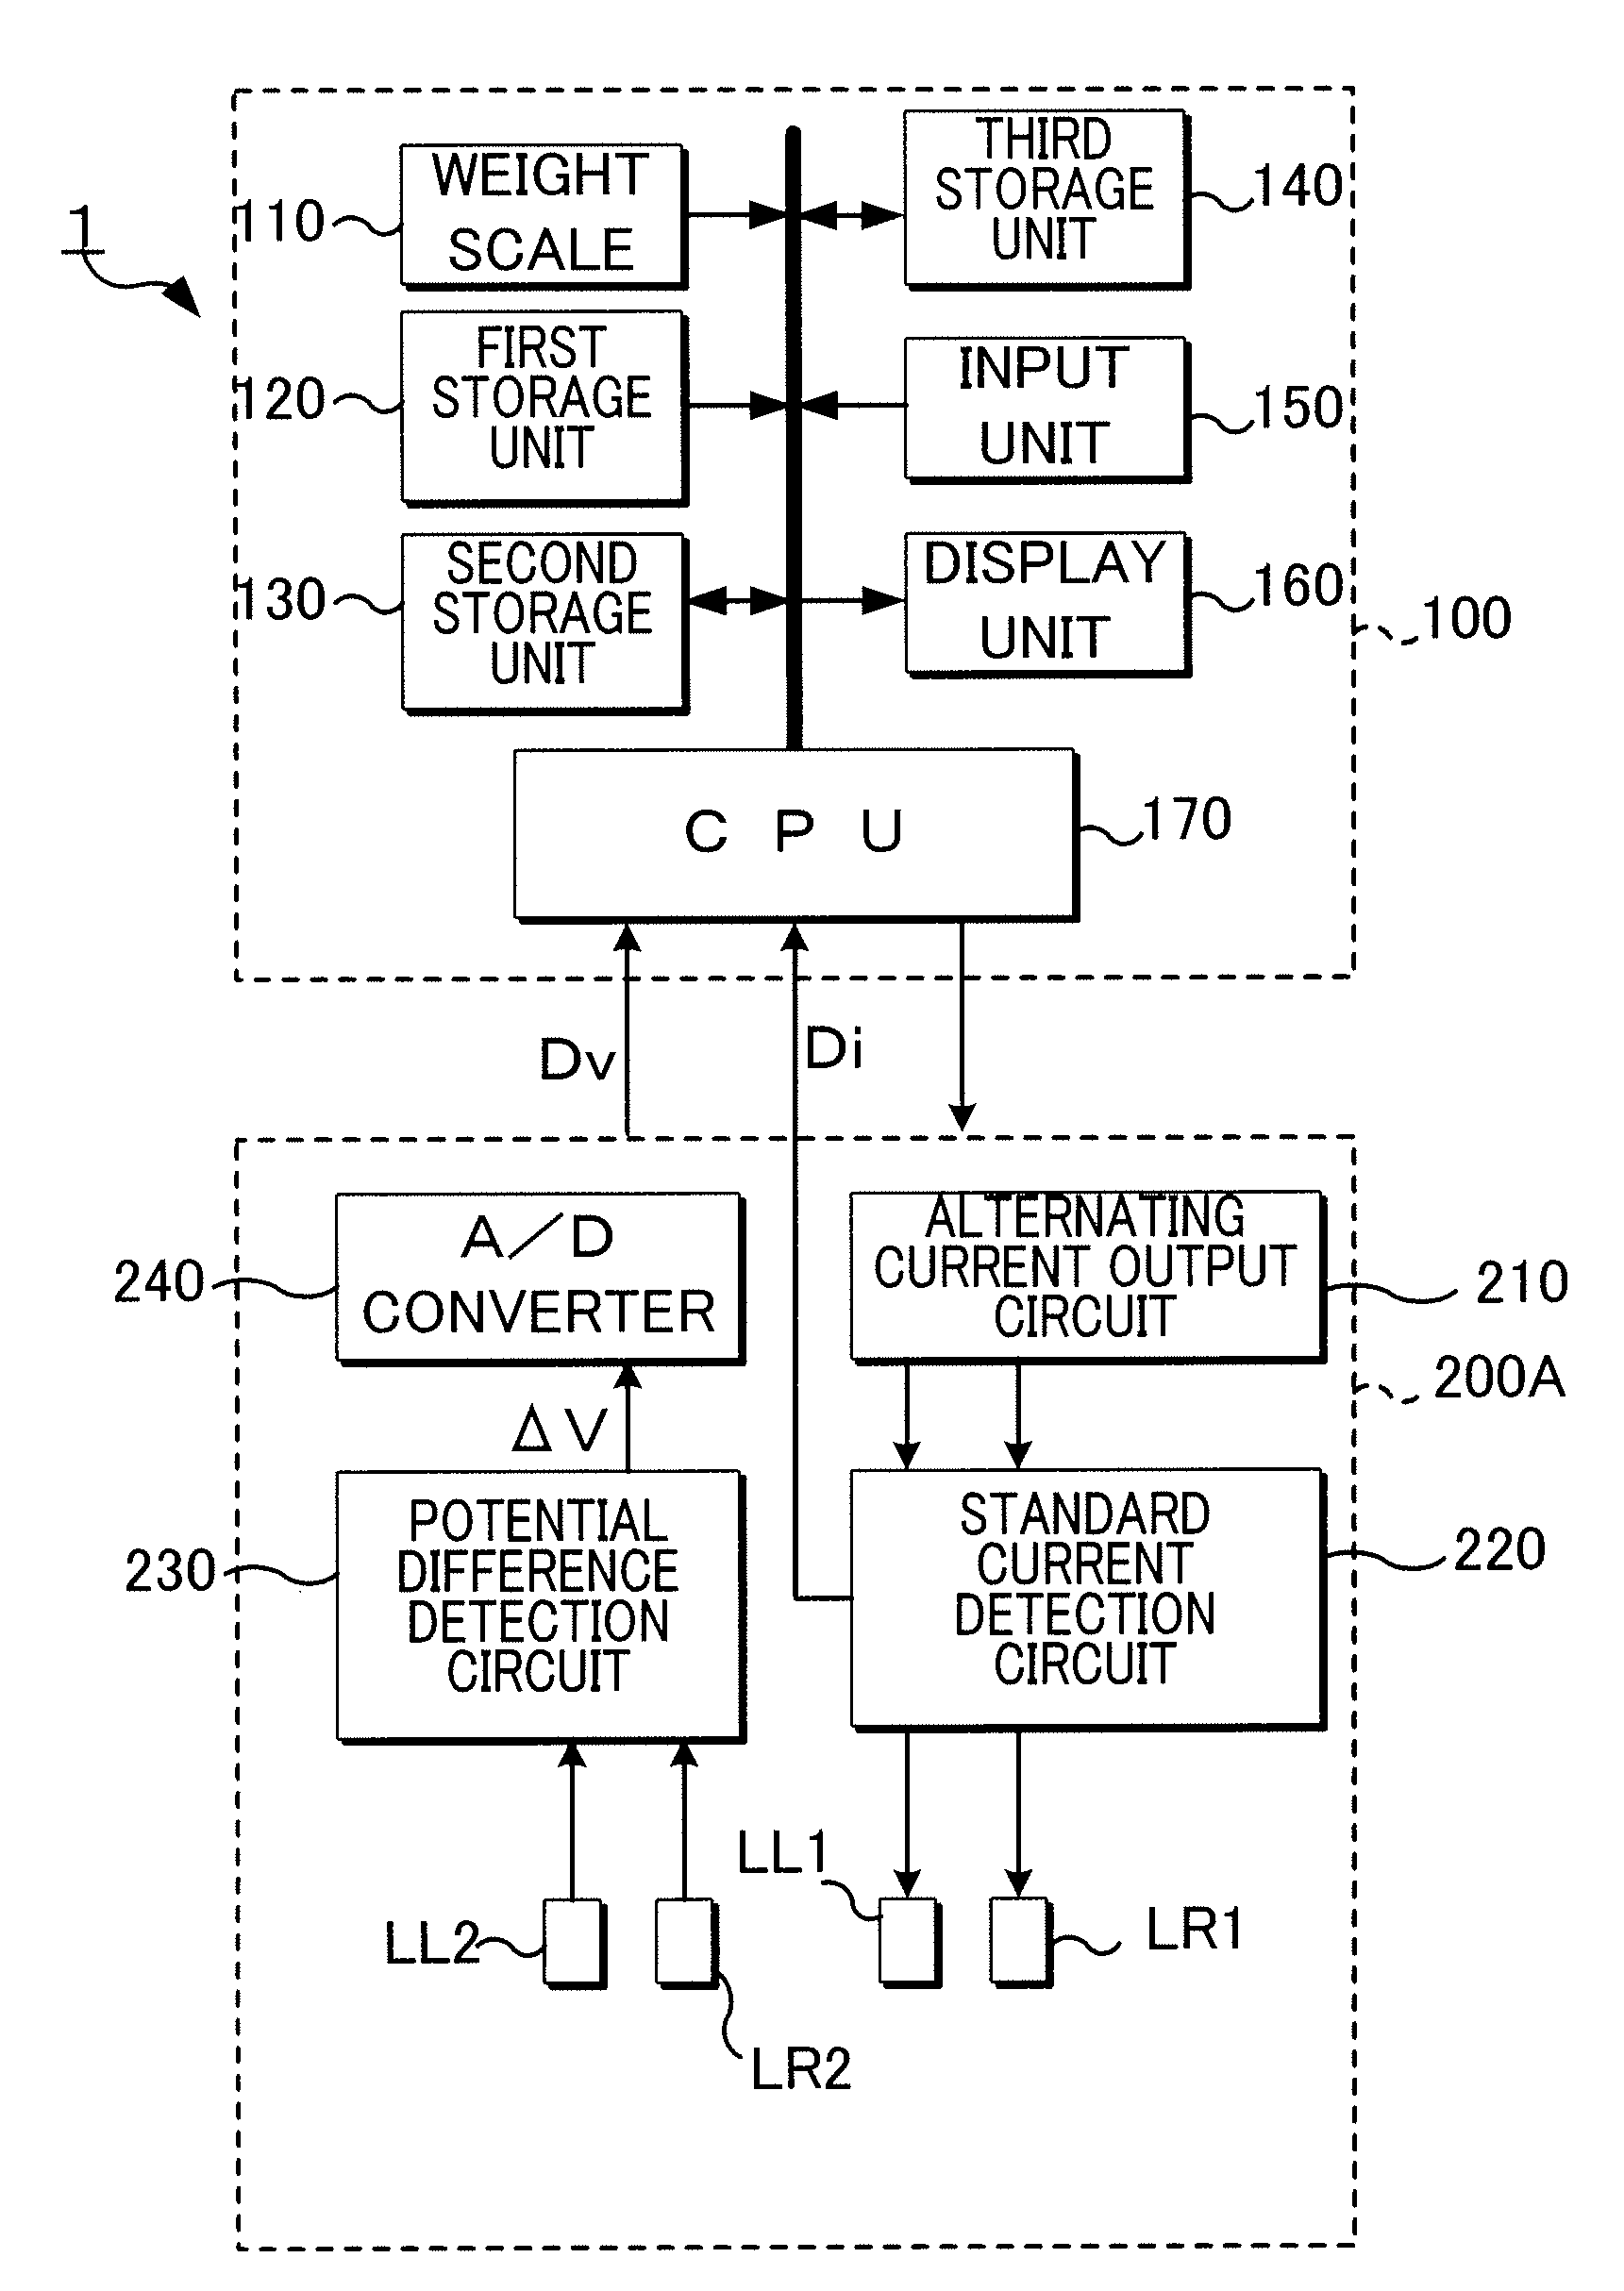 Human subject index estimation apparatus and method